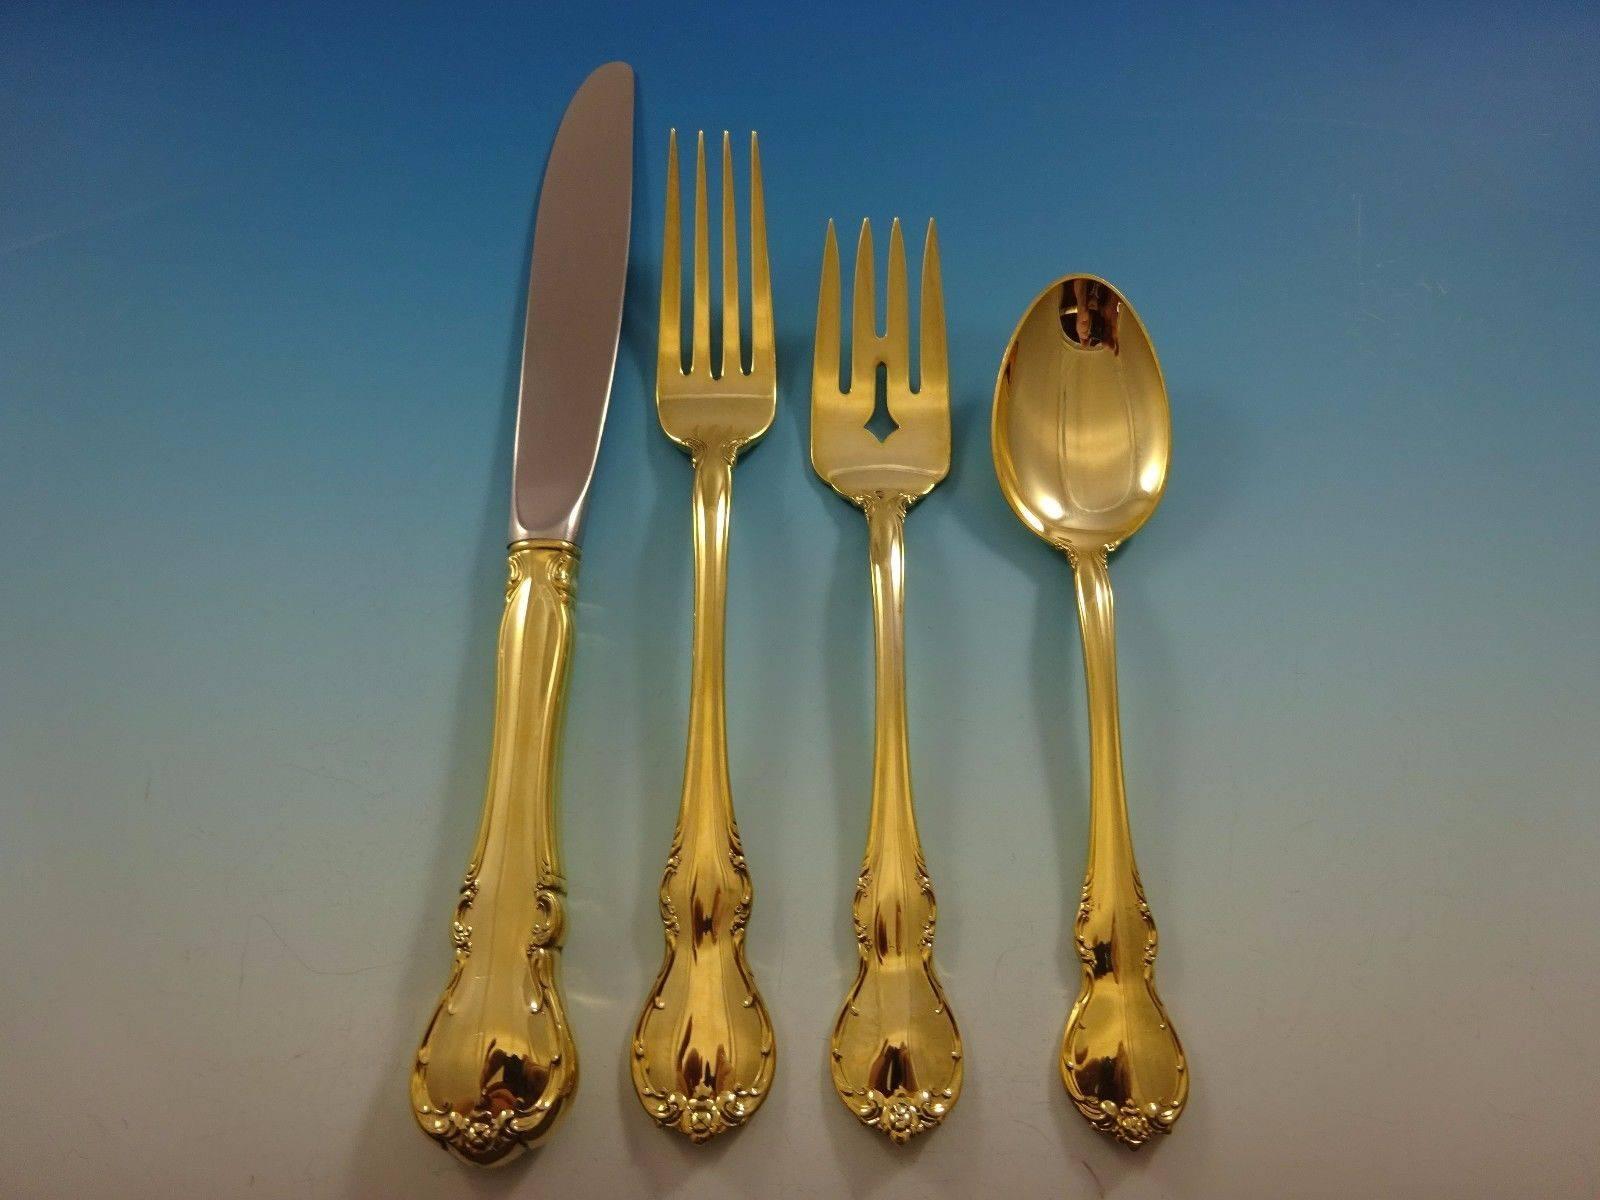 French provincial gold by Towle sterling silver flatware set - 48 pieces. This set is vermeil (completely gold-washed) and includes: 

12 knives, 8 3/4